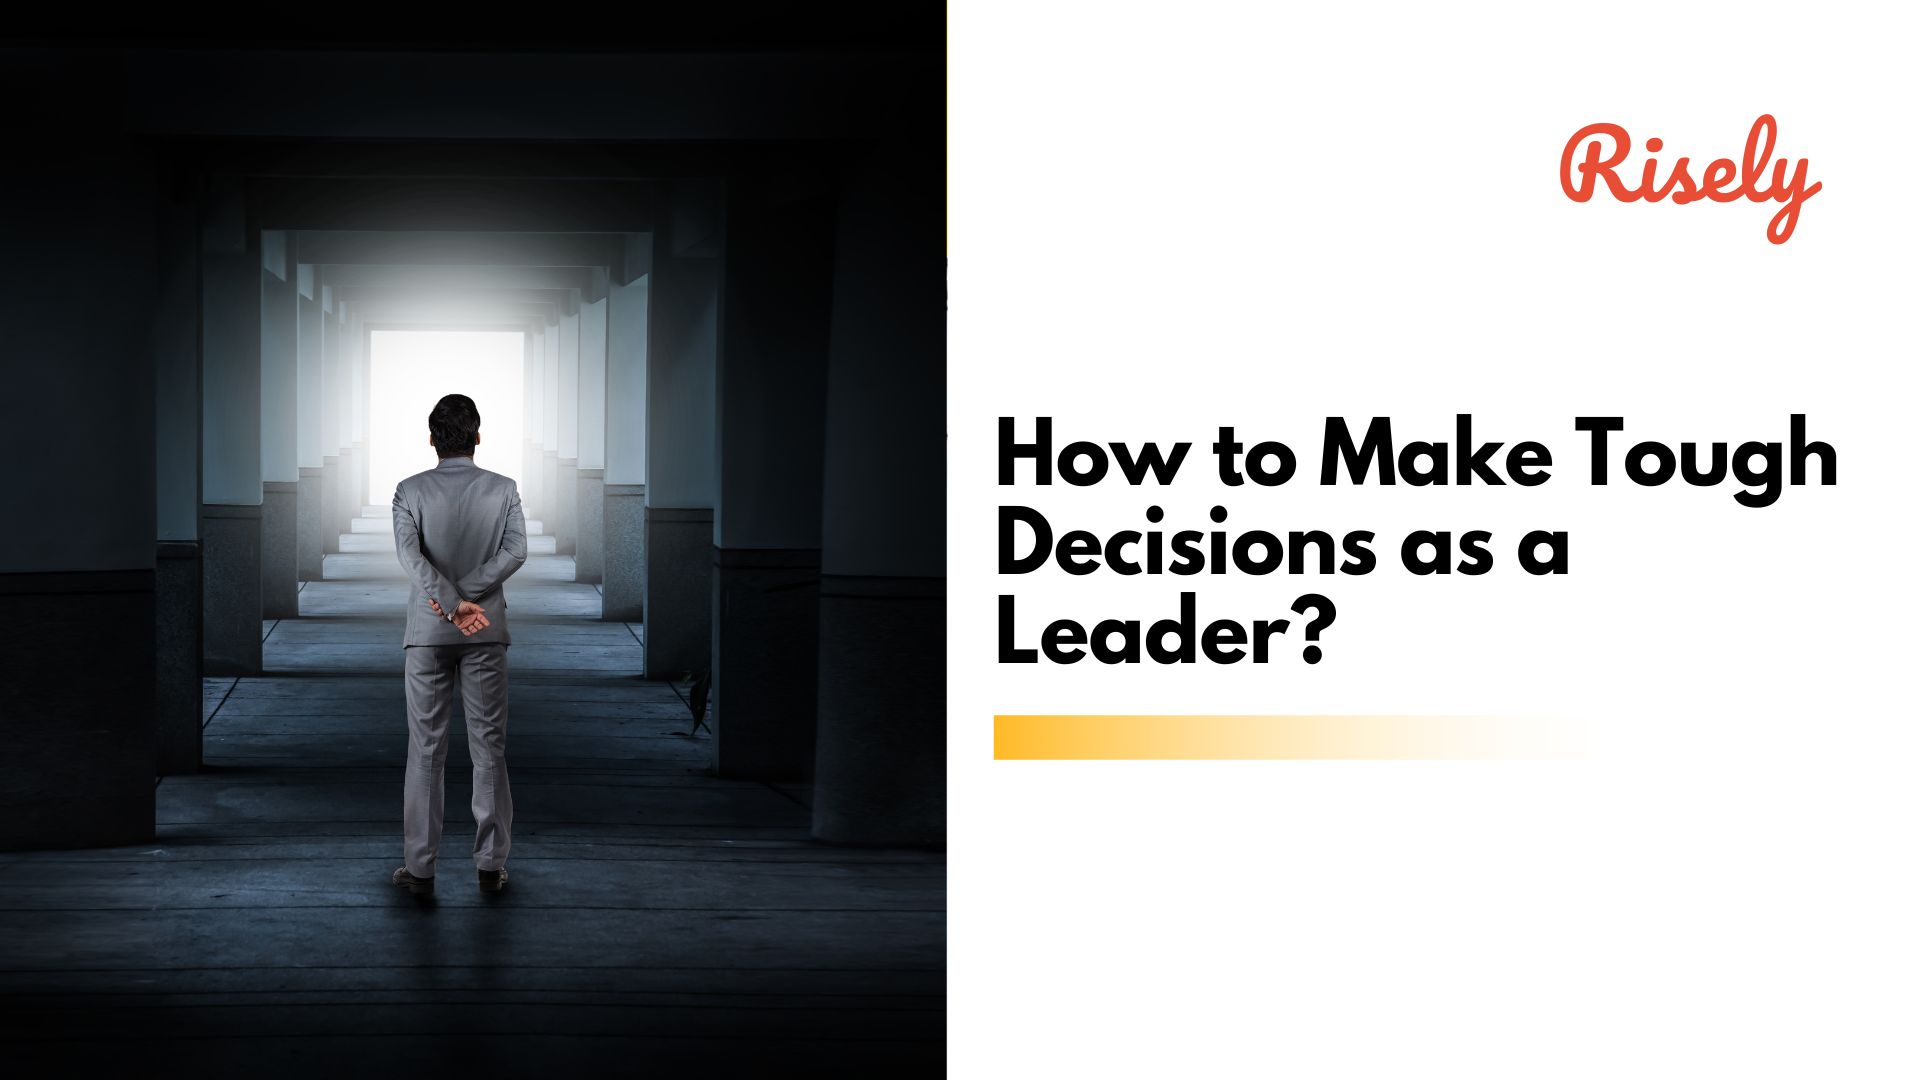 How to Make Tough Decisions as a Leader?